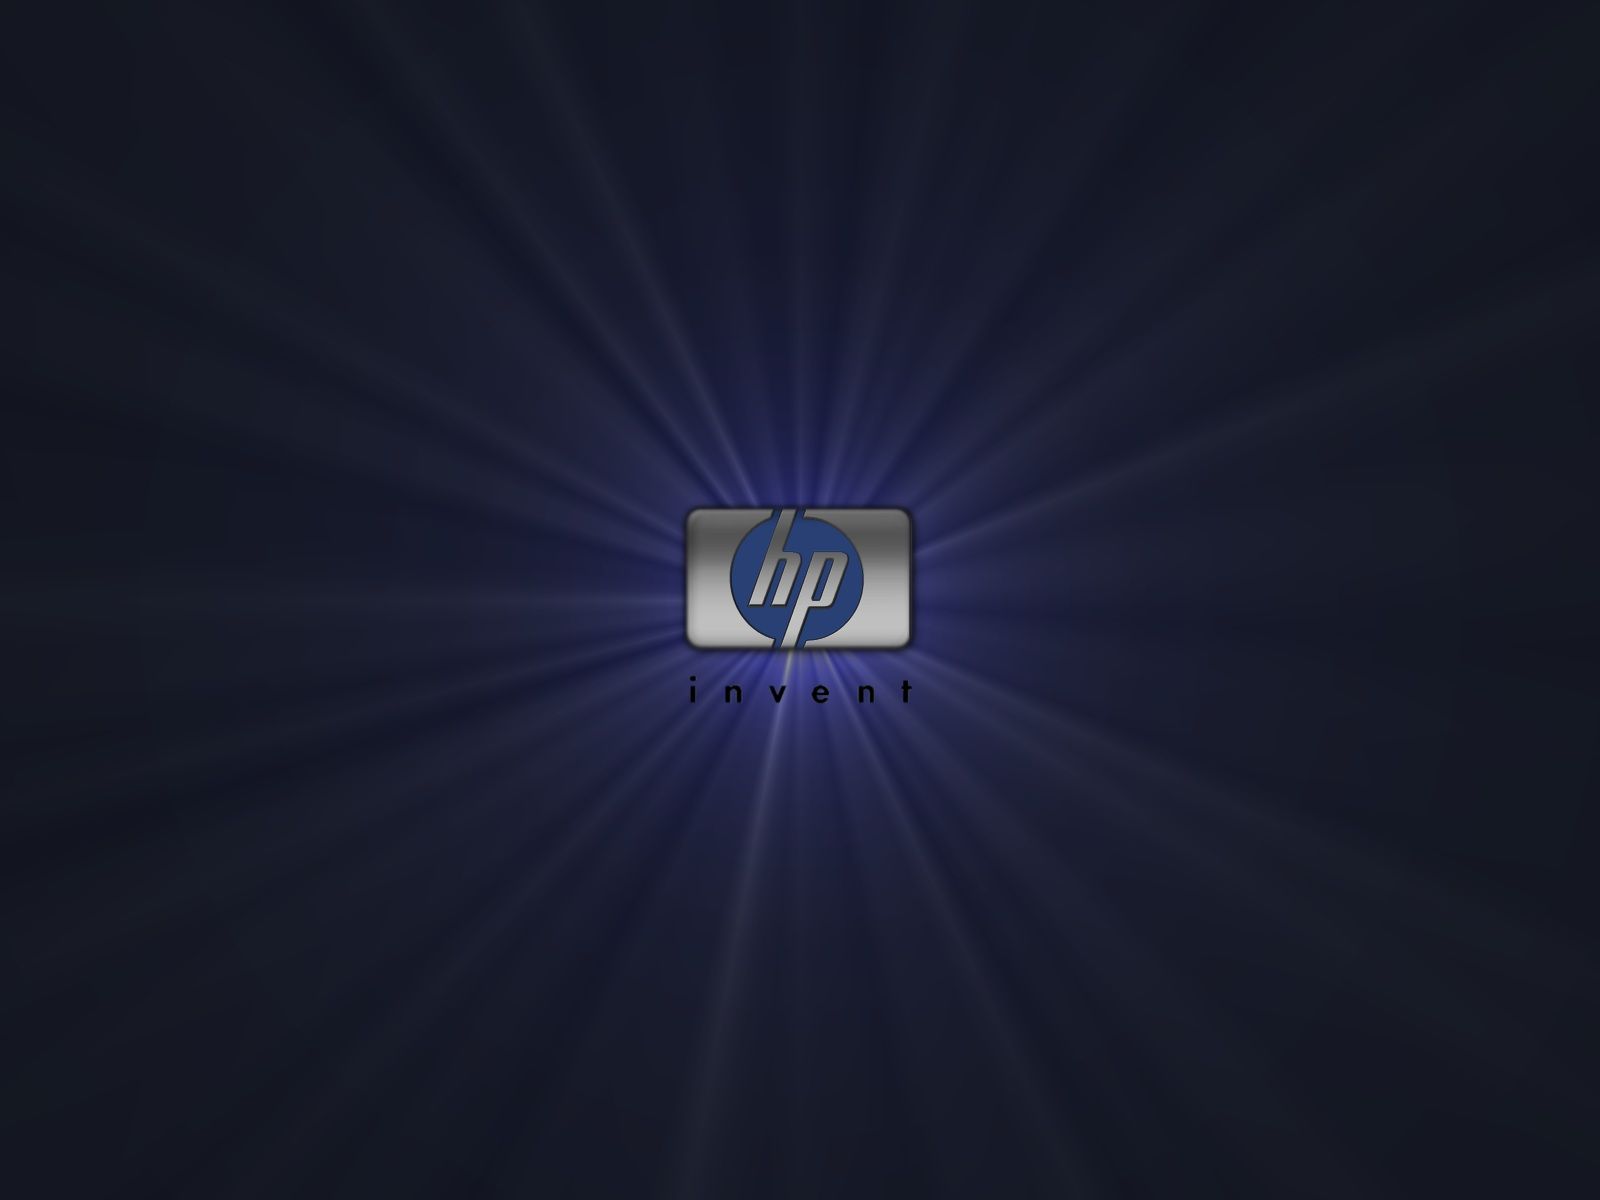 hp free hd iphone wallpapers | Desktop Backgrounds for Free HD ...